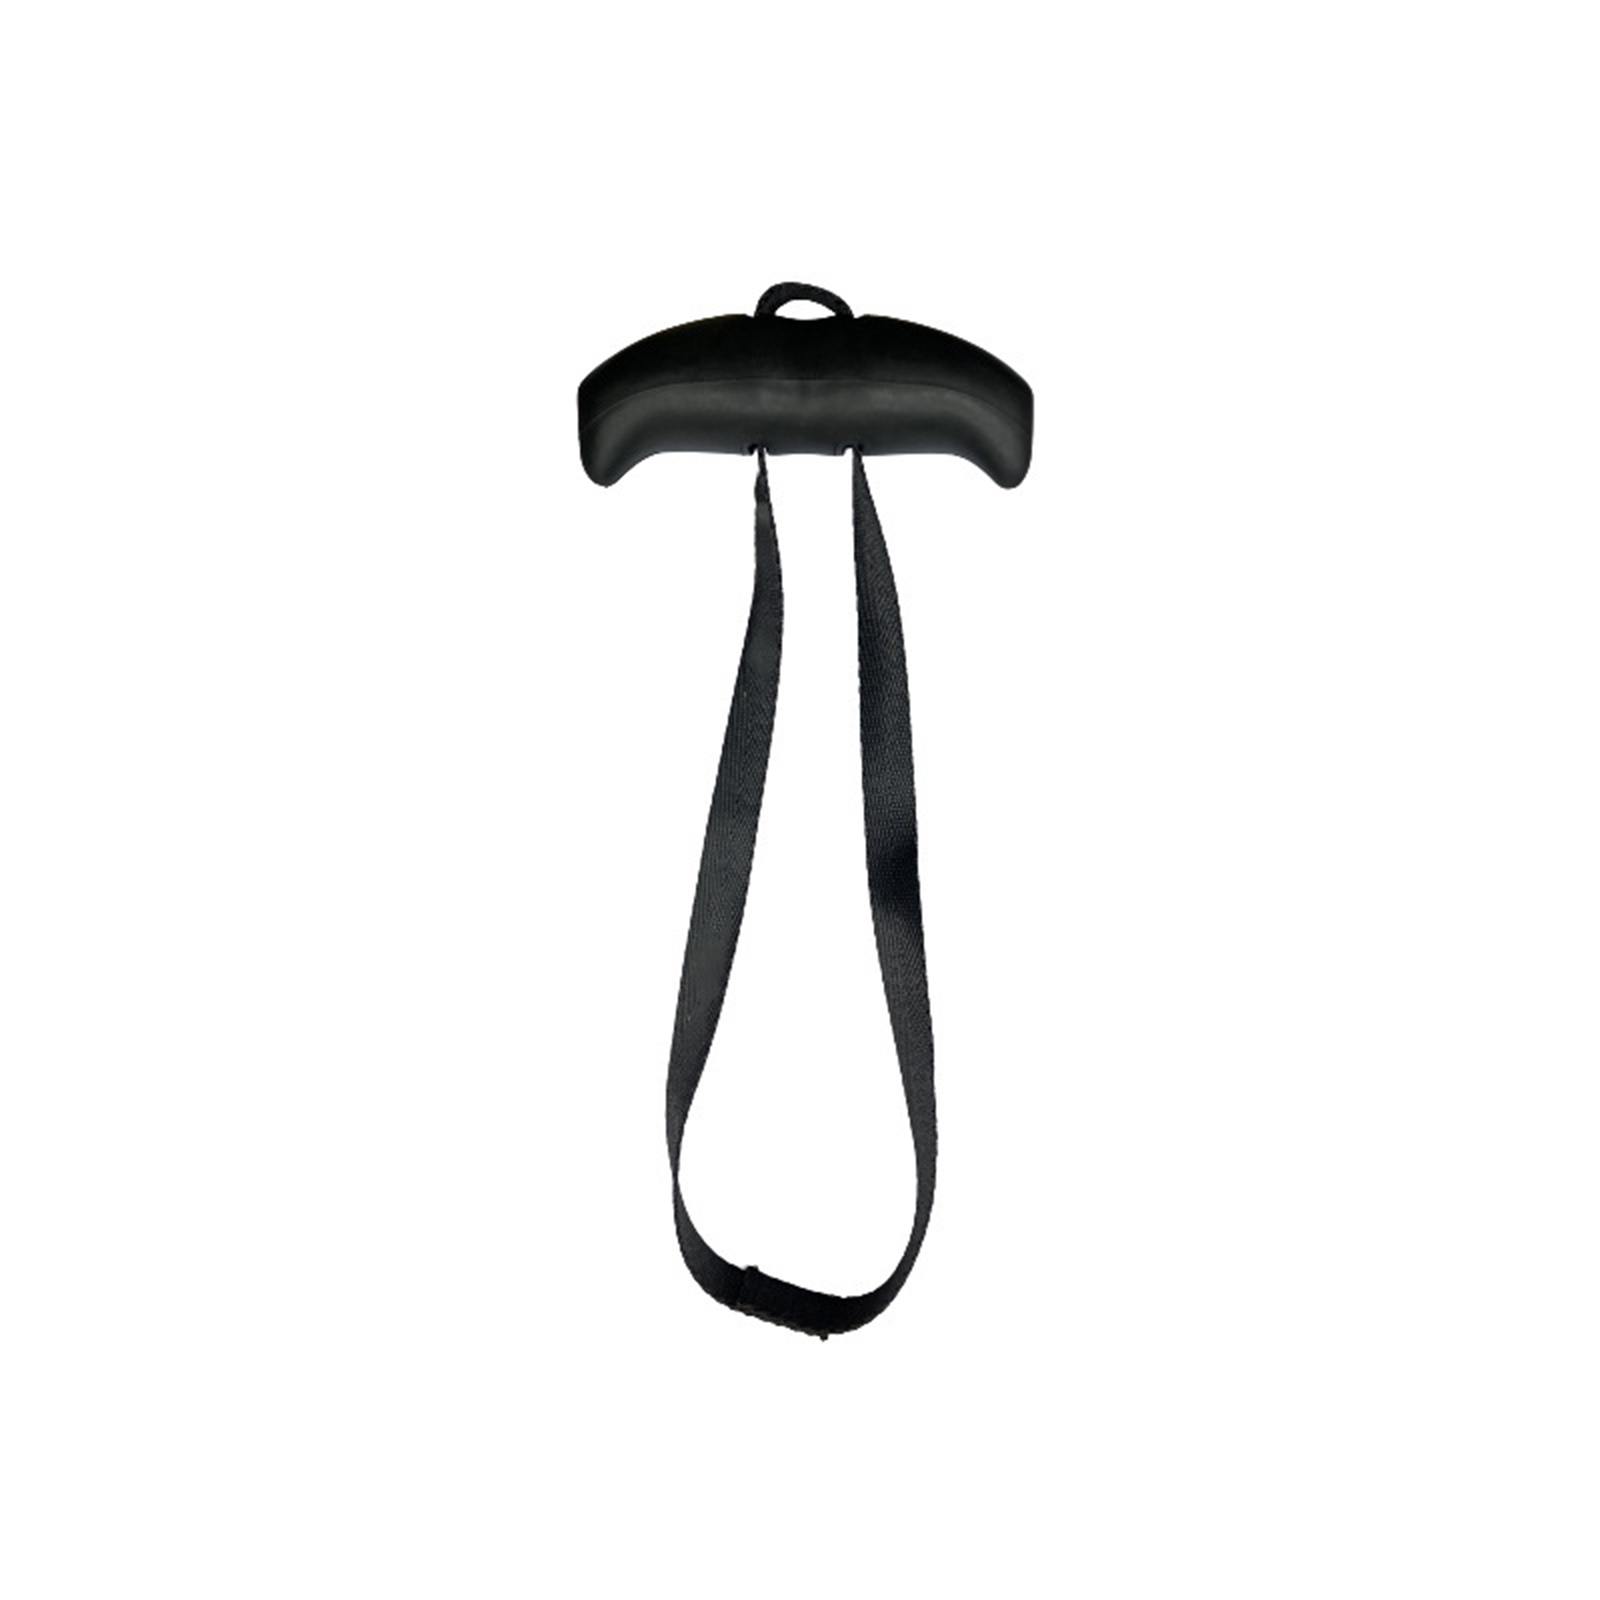 Pull Up Handles Ergonomic Exercise Resistance Band Tranining Grip Handles For Home Gym Pull-up Bars Barbells